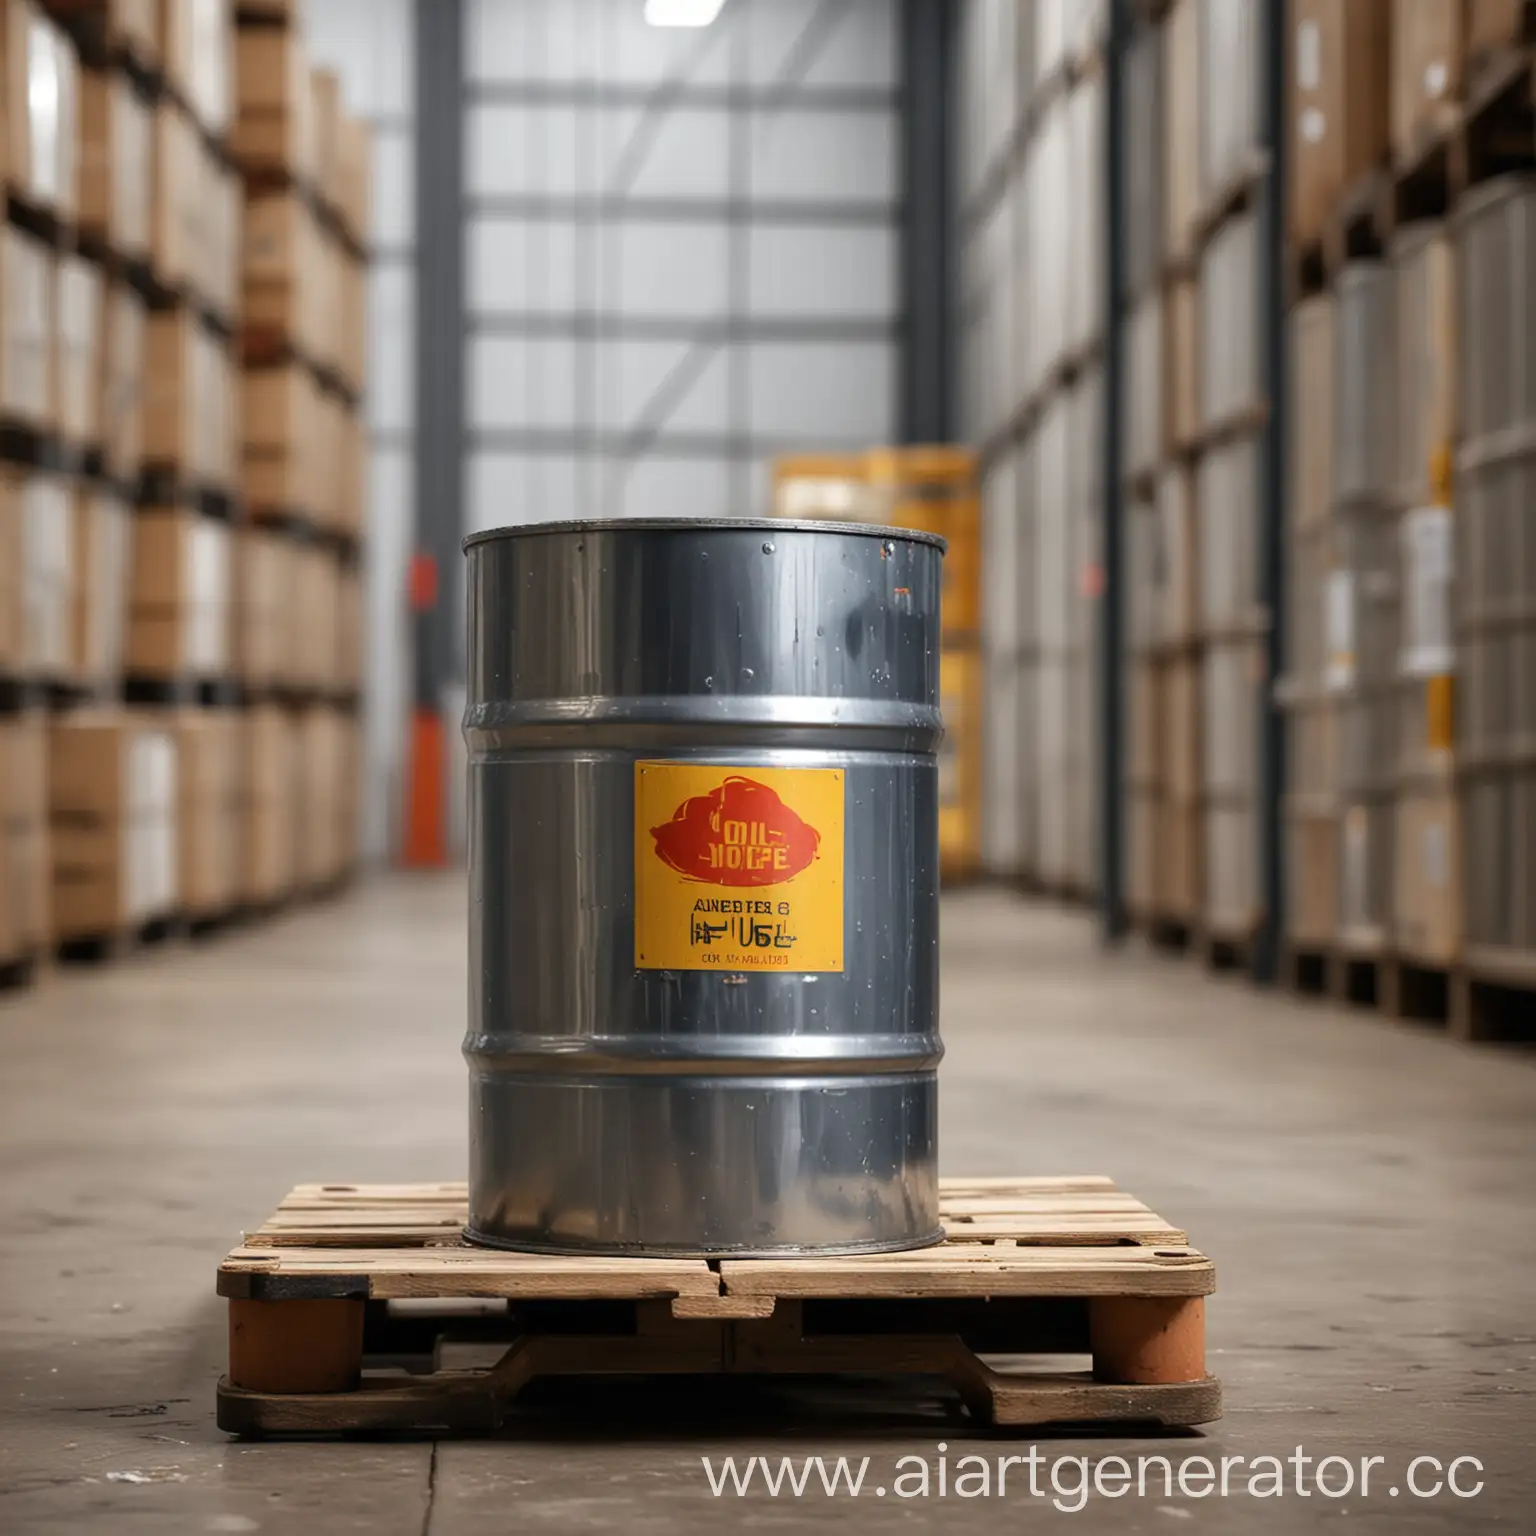 Metal-Barrel-with-Oil-on-Pallet-in-Lubricant-Warehouse